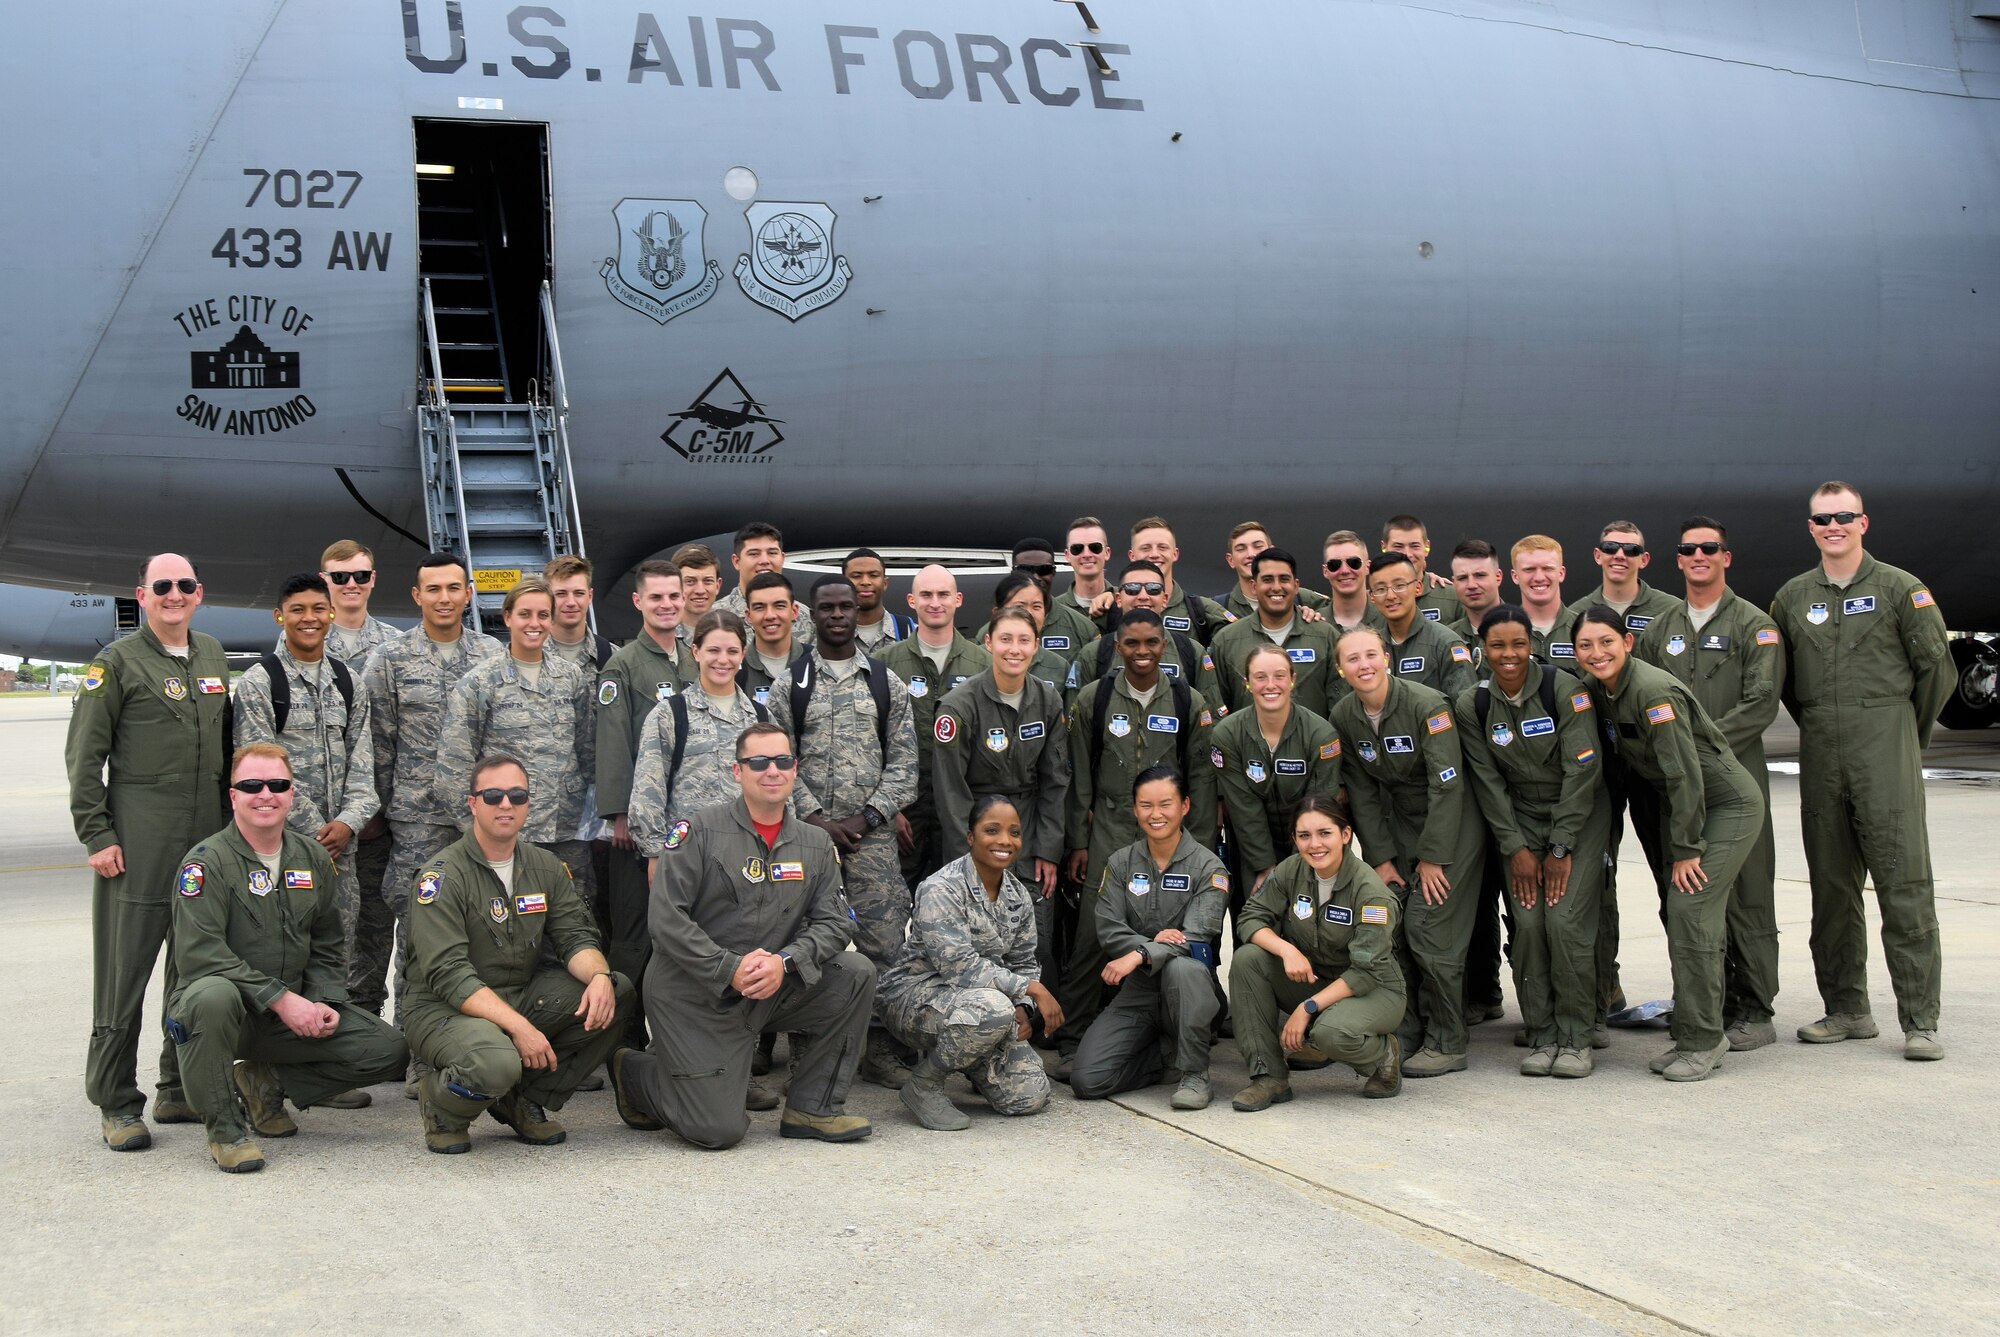 U.S. Air Force Academy cadets pose with Col. Thomas K. Smith Jr. (far left), 433rd Airlift Wing commander, and the Reserve Citizen Airmen aircrew of the C-5M Super Galaxy aircraft after an incentive flight from Joint Base San Antonio-Lackland, Texas, June 8, 2018. With the C-5M, the Alamo Wing provides massive strategic airlift for deployment and supply of combat and support forces worldwide. (U.S. Air Force photo by Staff Sgt. Lauren M. Snyder)